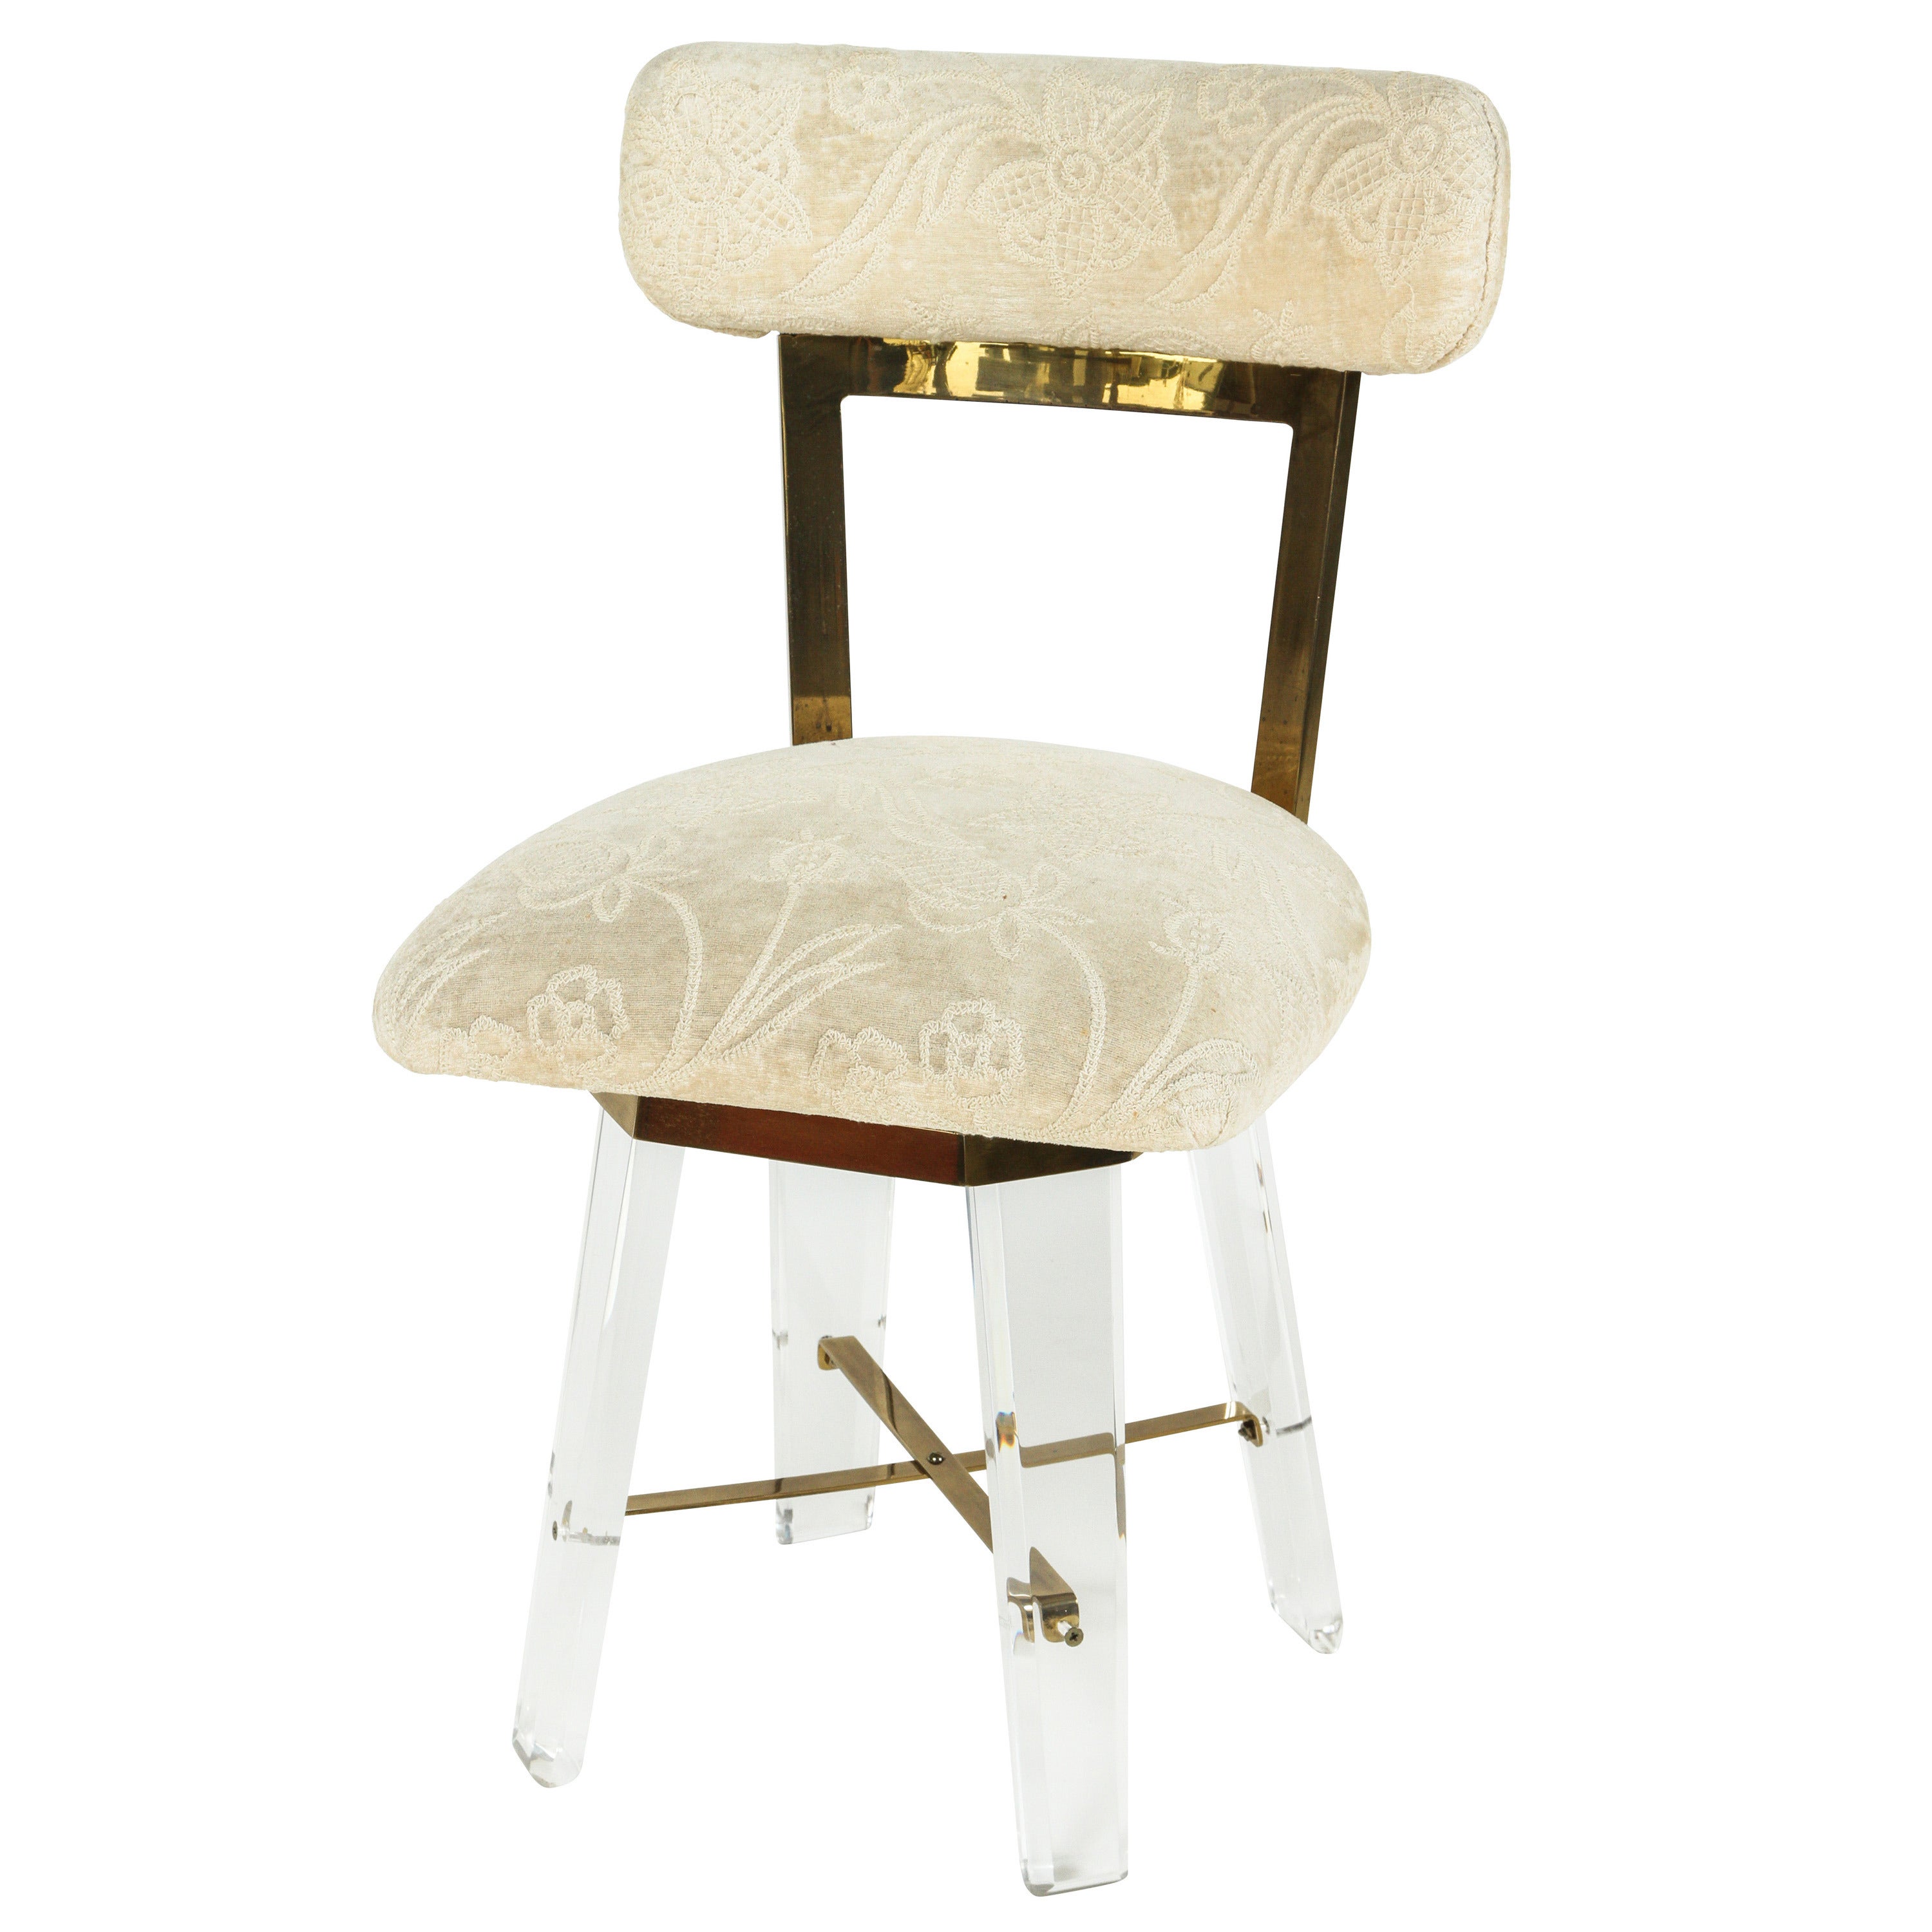 Elegant Lucite and Brass Swiveling Vanity Chair